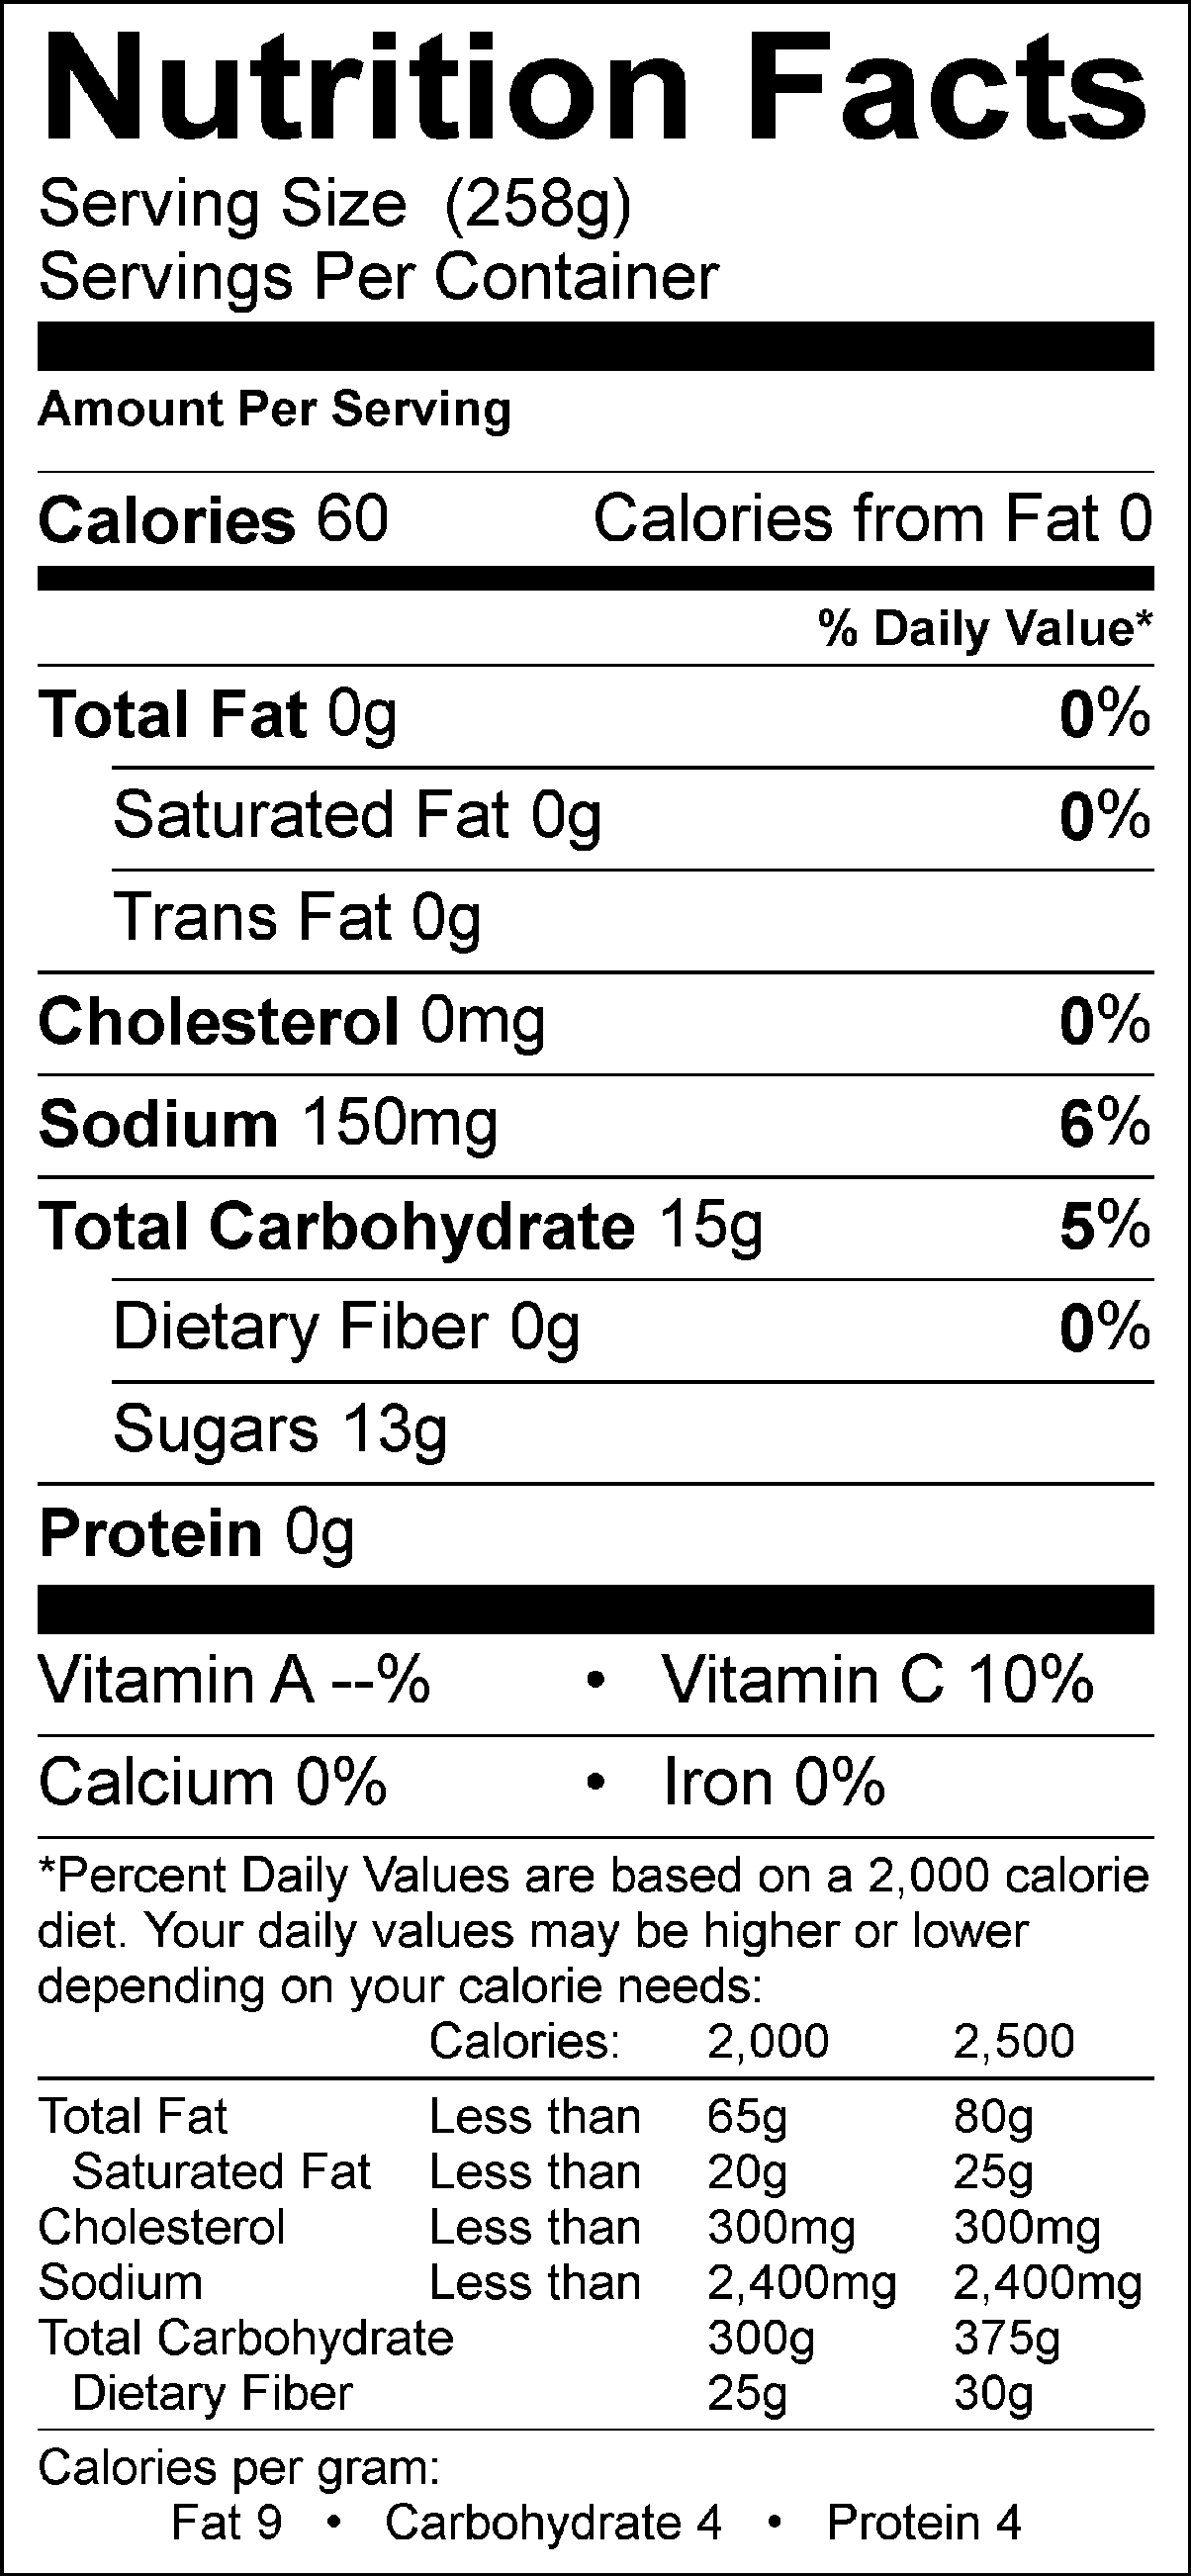 Quick Easy Tips Gatorade Nutrition Facts Label in nutrition facts red wine intended for Residence